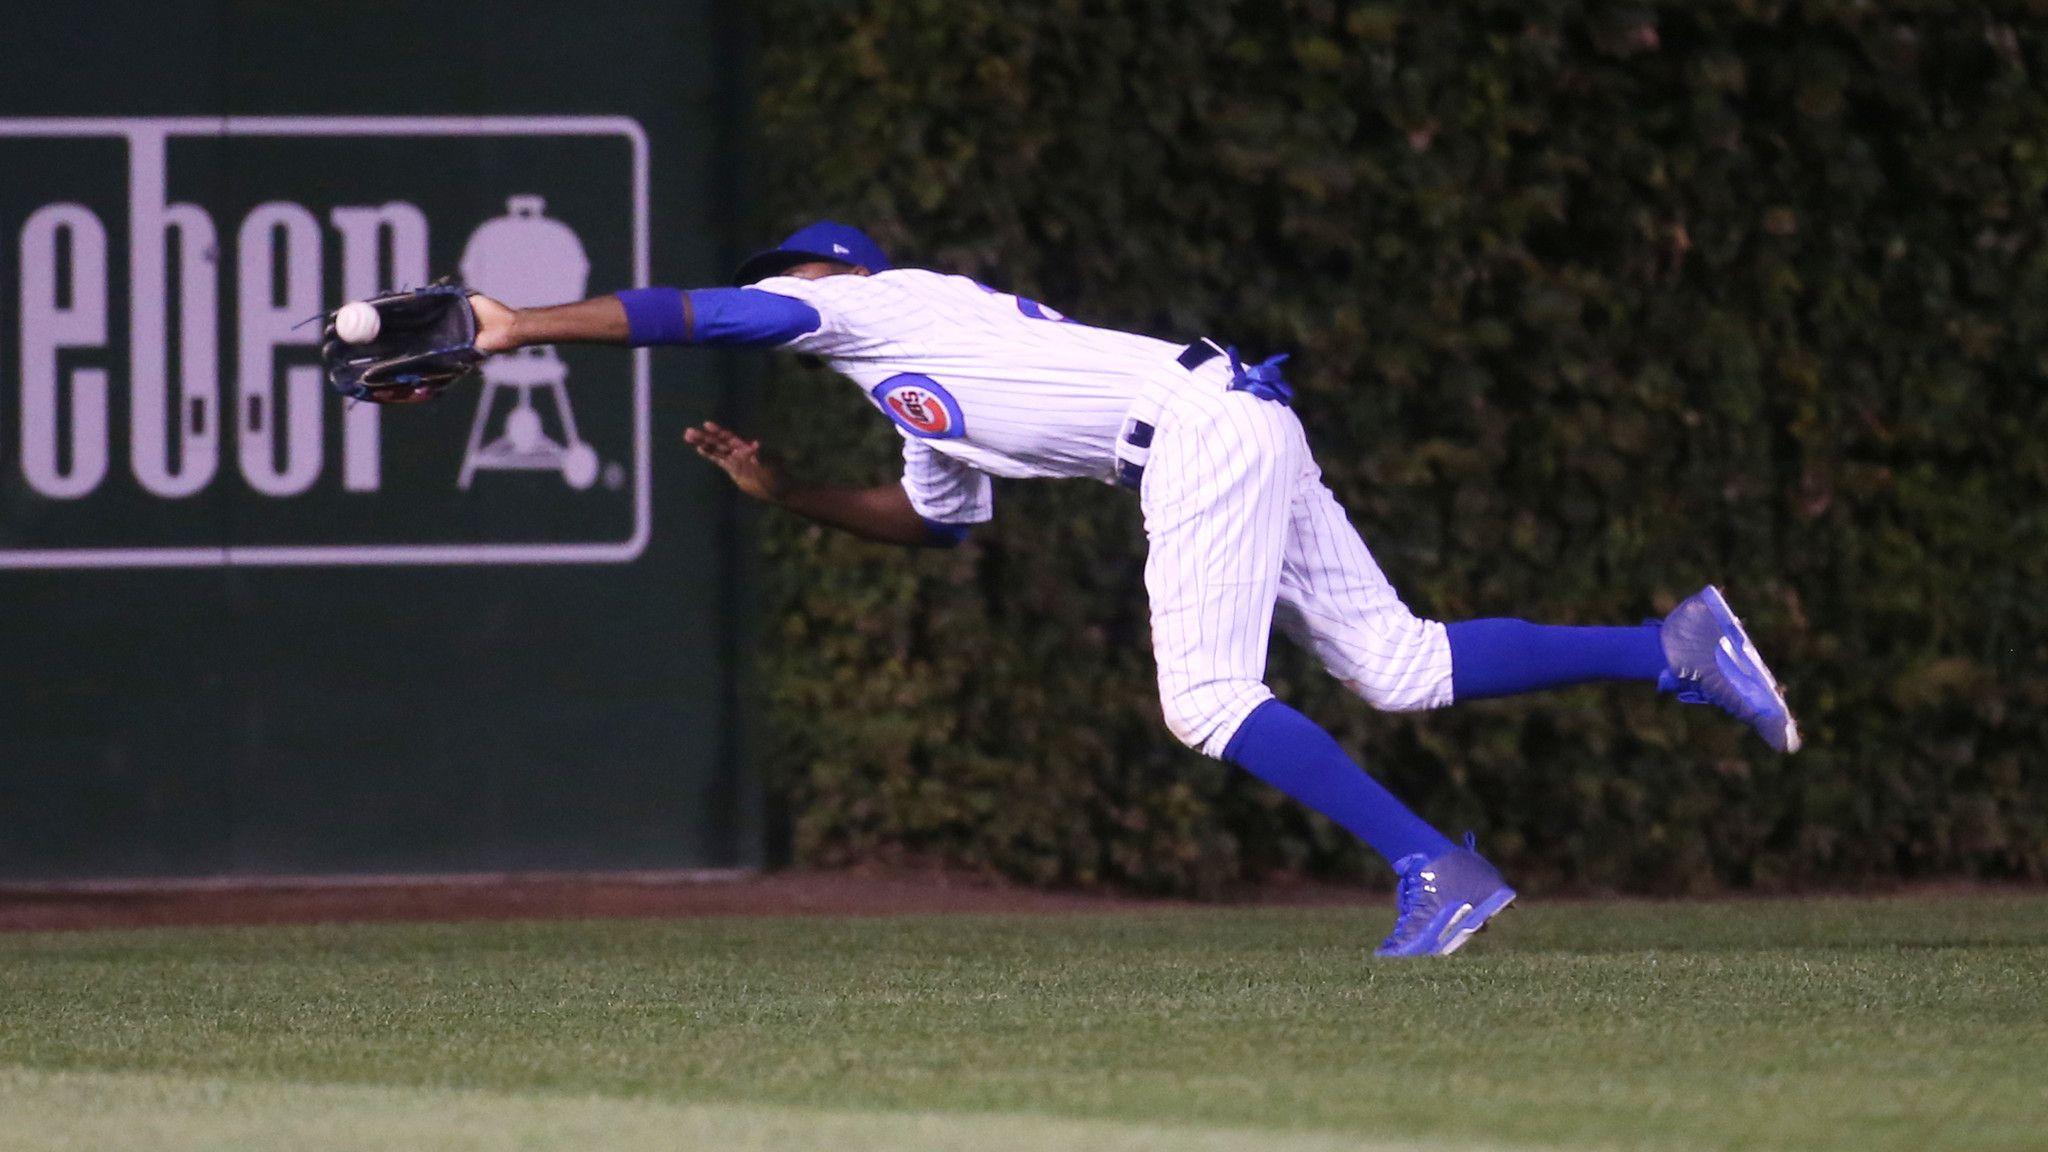 Cubs' Dexter Fowler takes a few steps back on defense